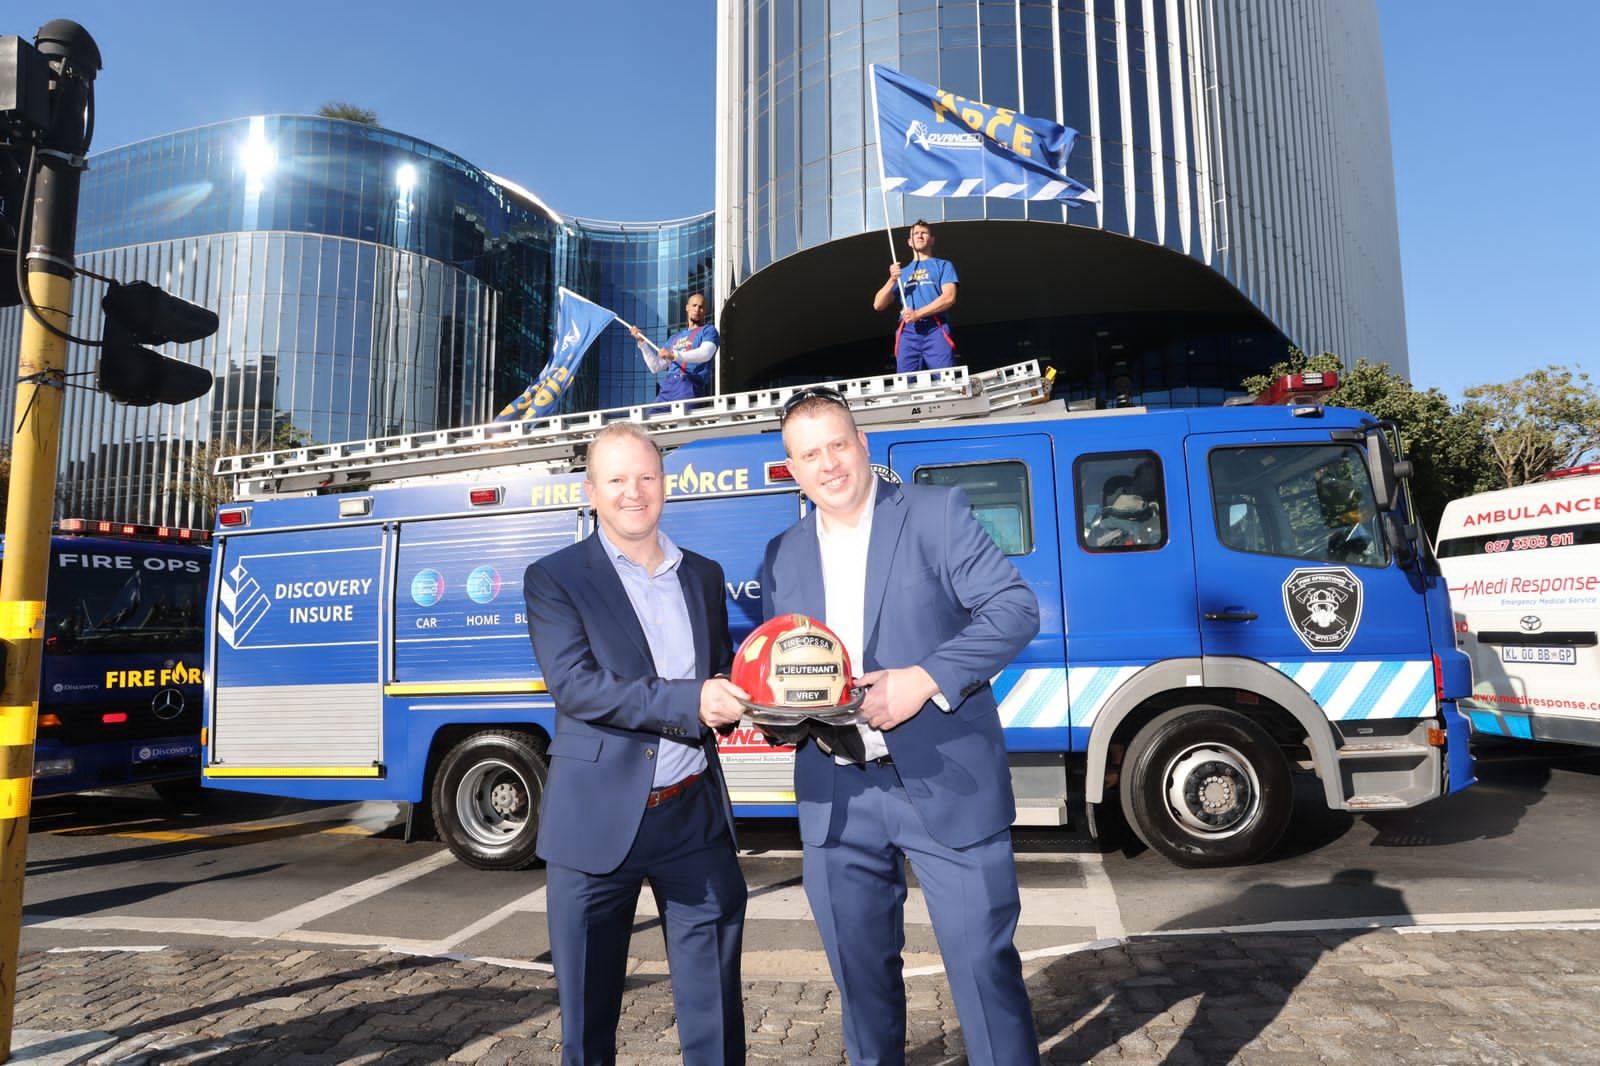 Anton Ossip, from Discovery Insure, and Hadley Shapiro of Advanced EMS, in front of the new Discovery Insure fire trucks Photo: Supplied